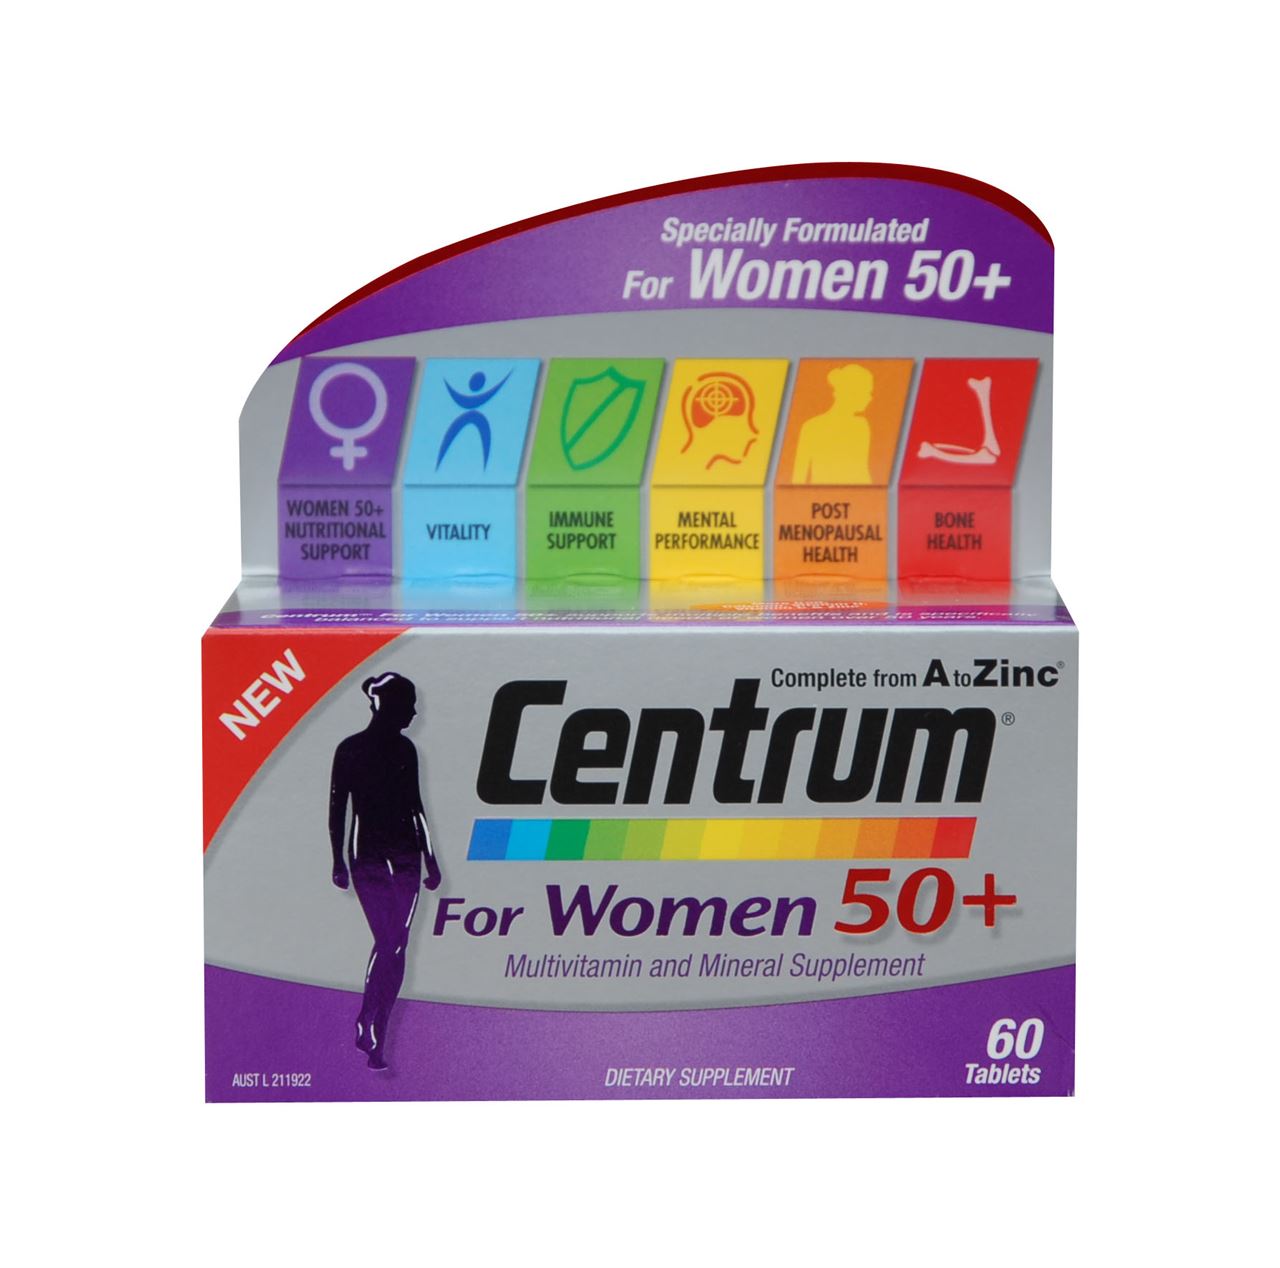 Centrum for Women 50+ Multivitamin and Mineral Supplement Tablets 60